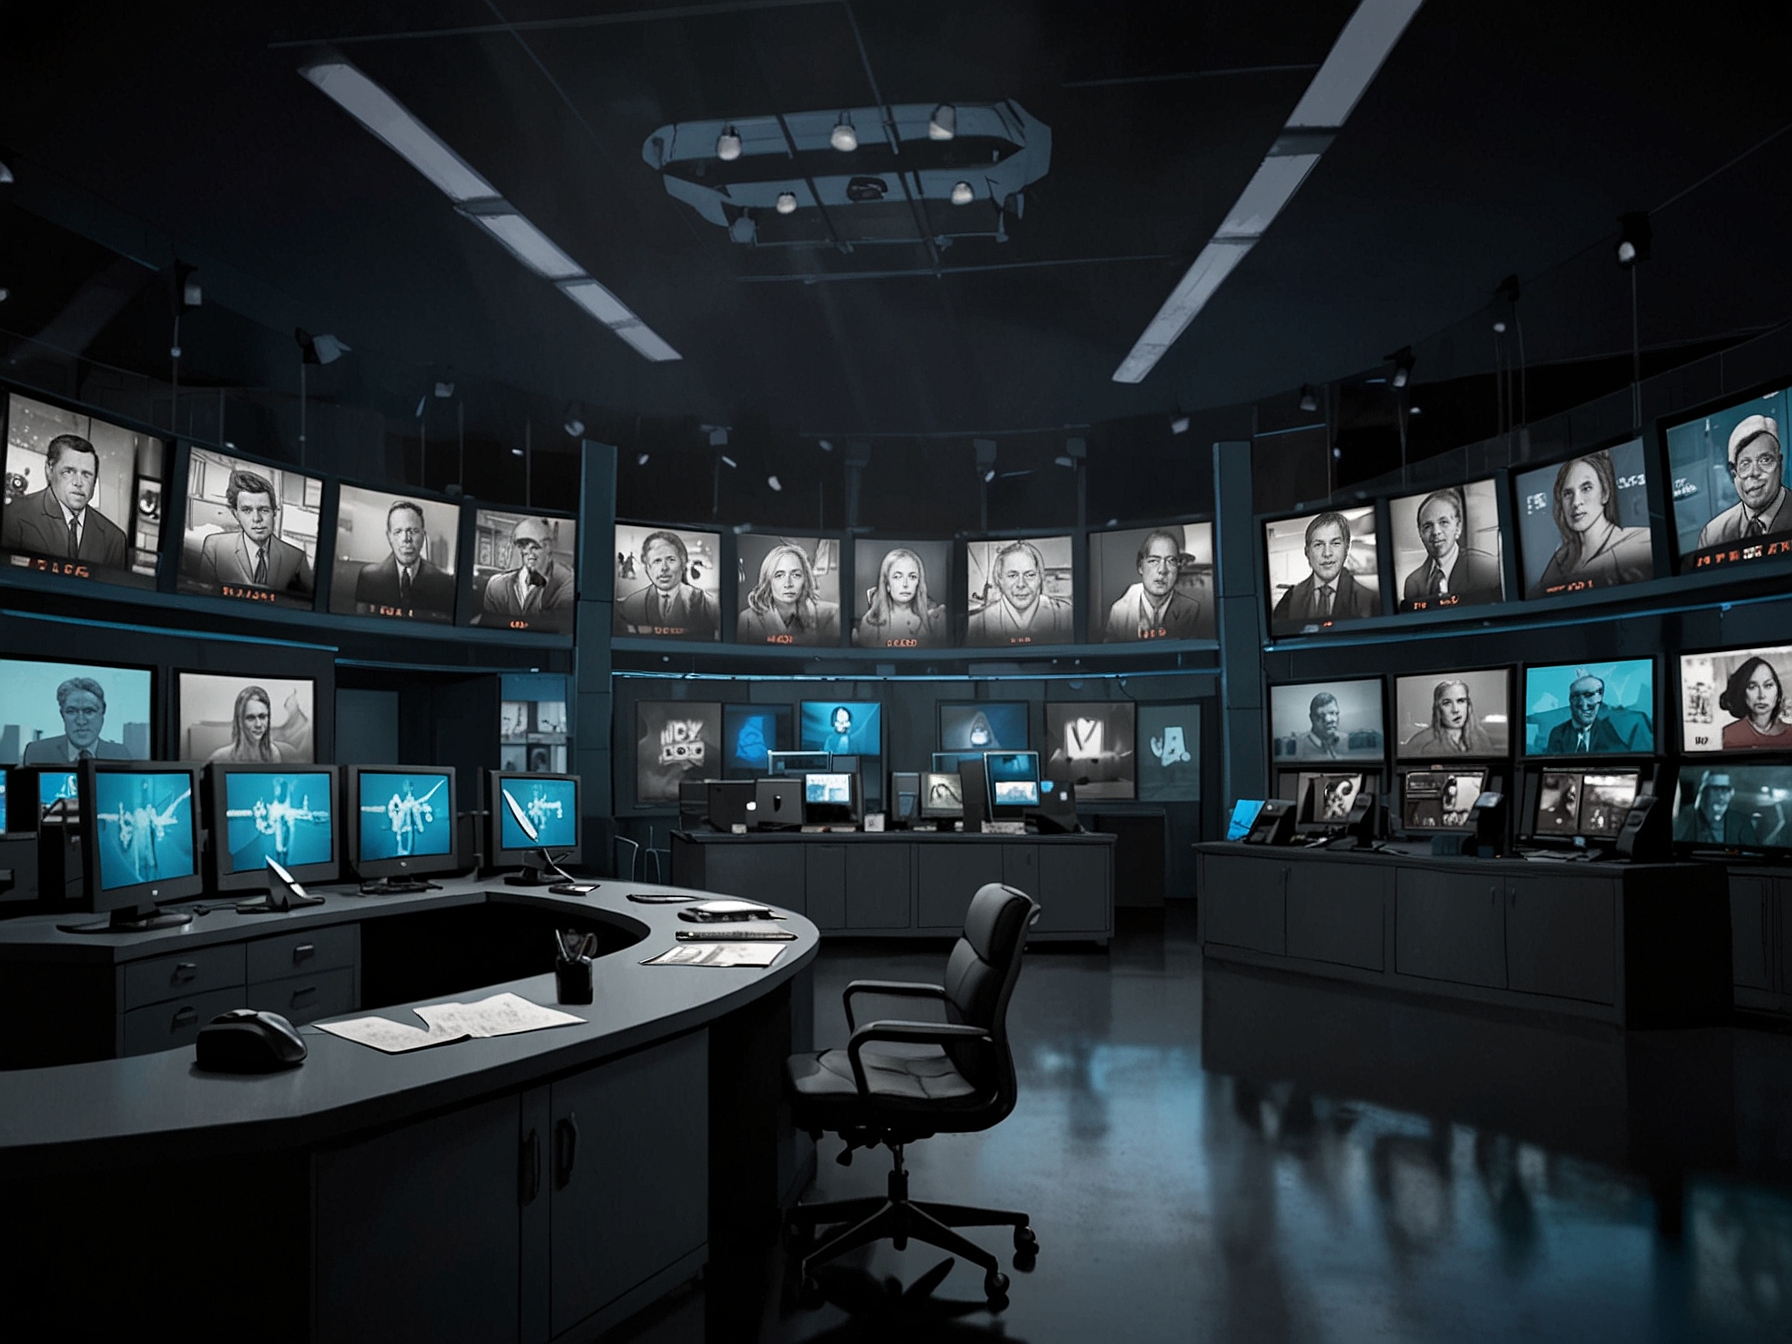 An NBC studio with screens playing popular true crime shows like 'Dateline NBC,' symbolizing the network's strong identity in delivering gripping and investigative programming.